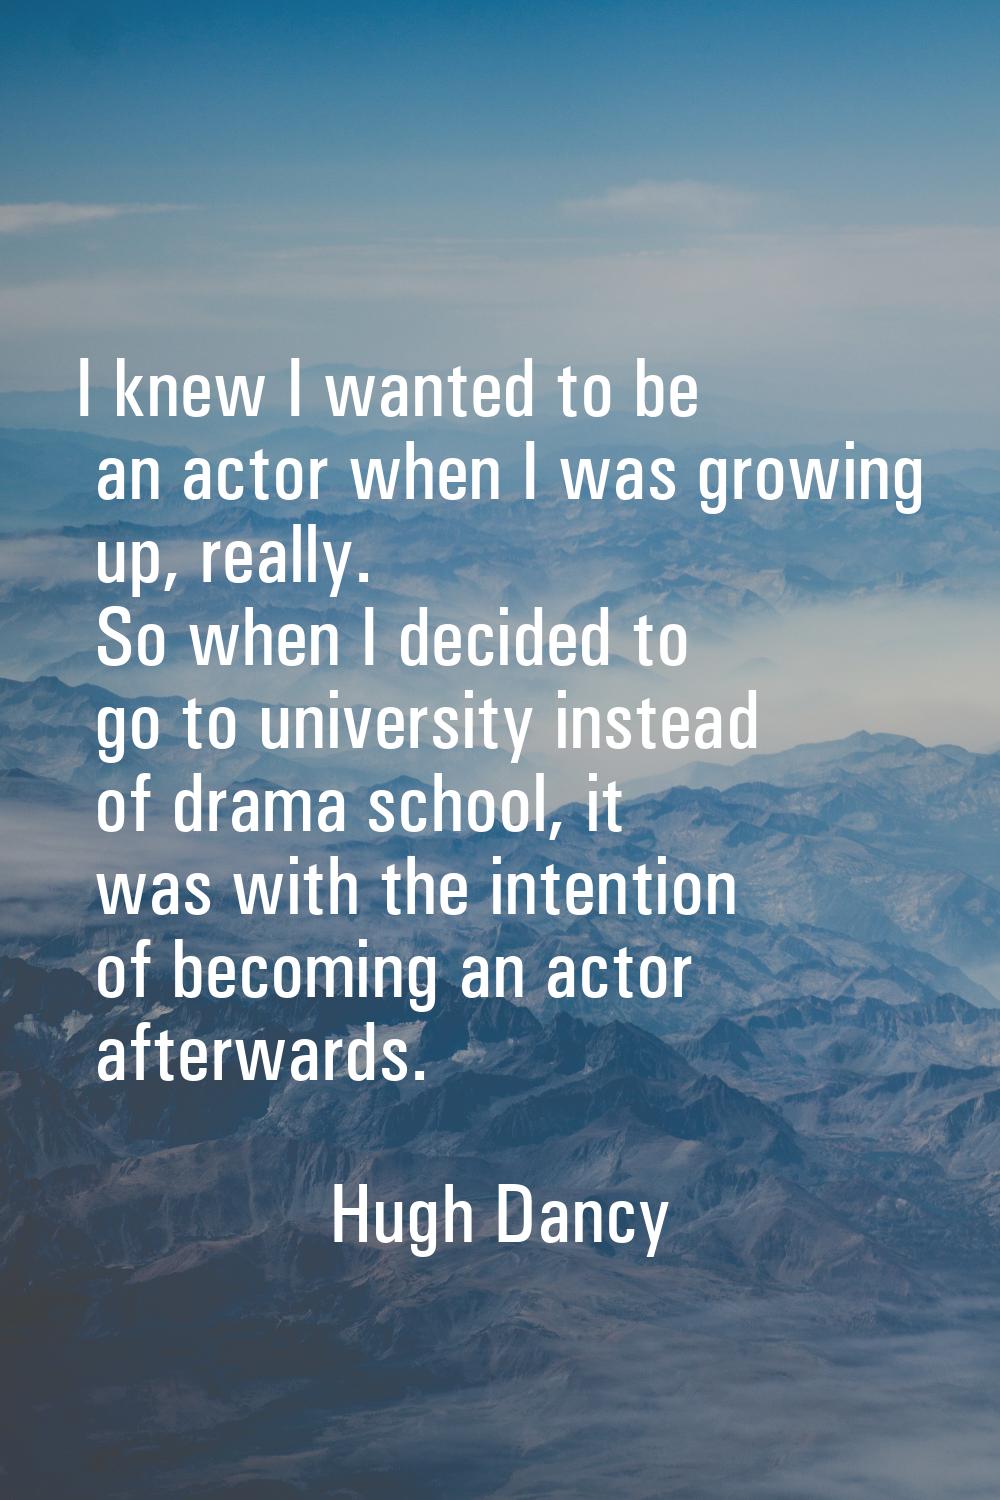 I knew I wanted to be an actor when I was growing up, really. So when I decided to go to university